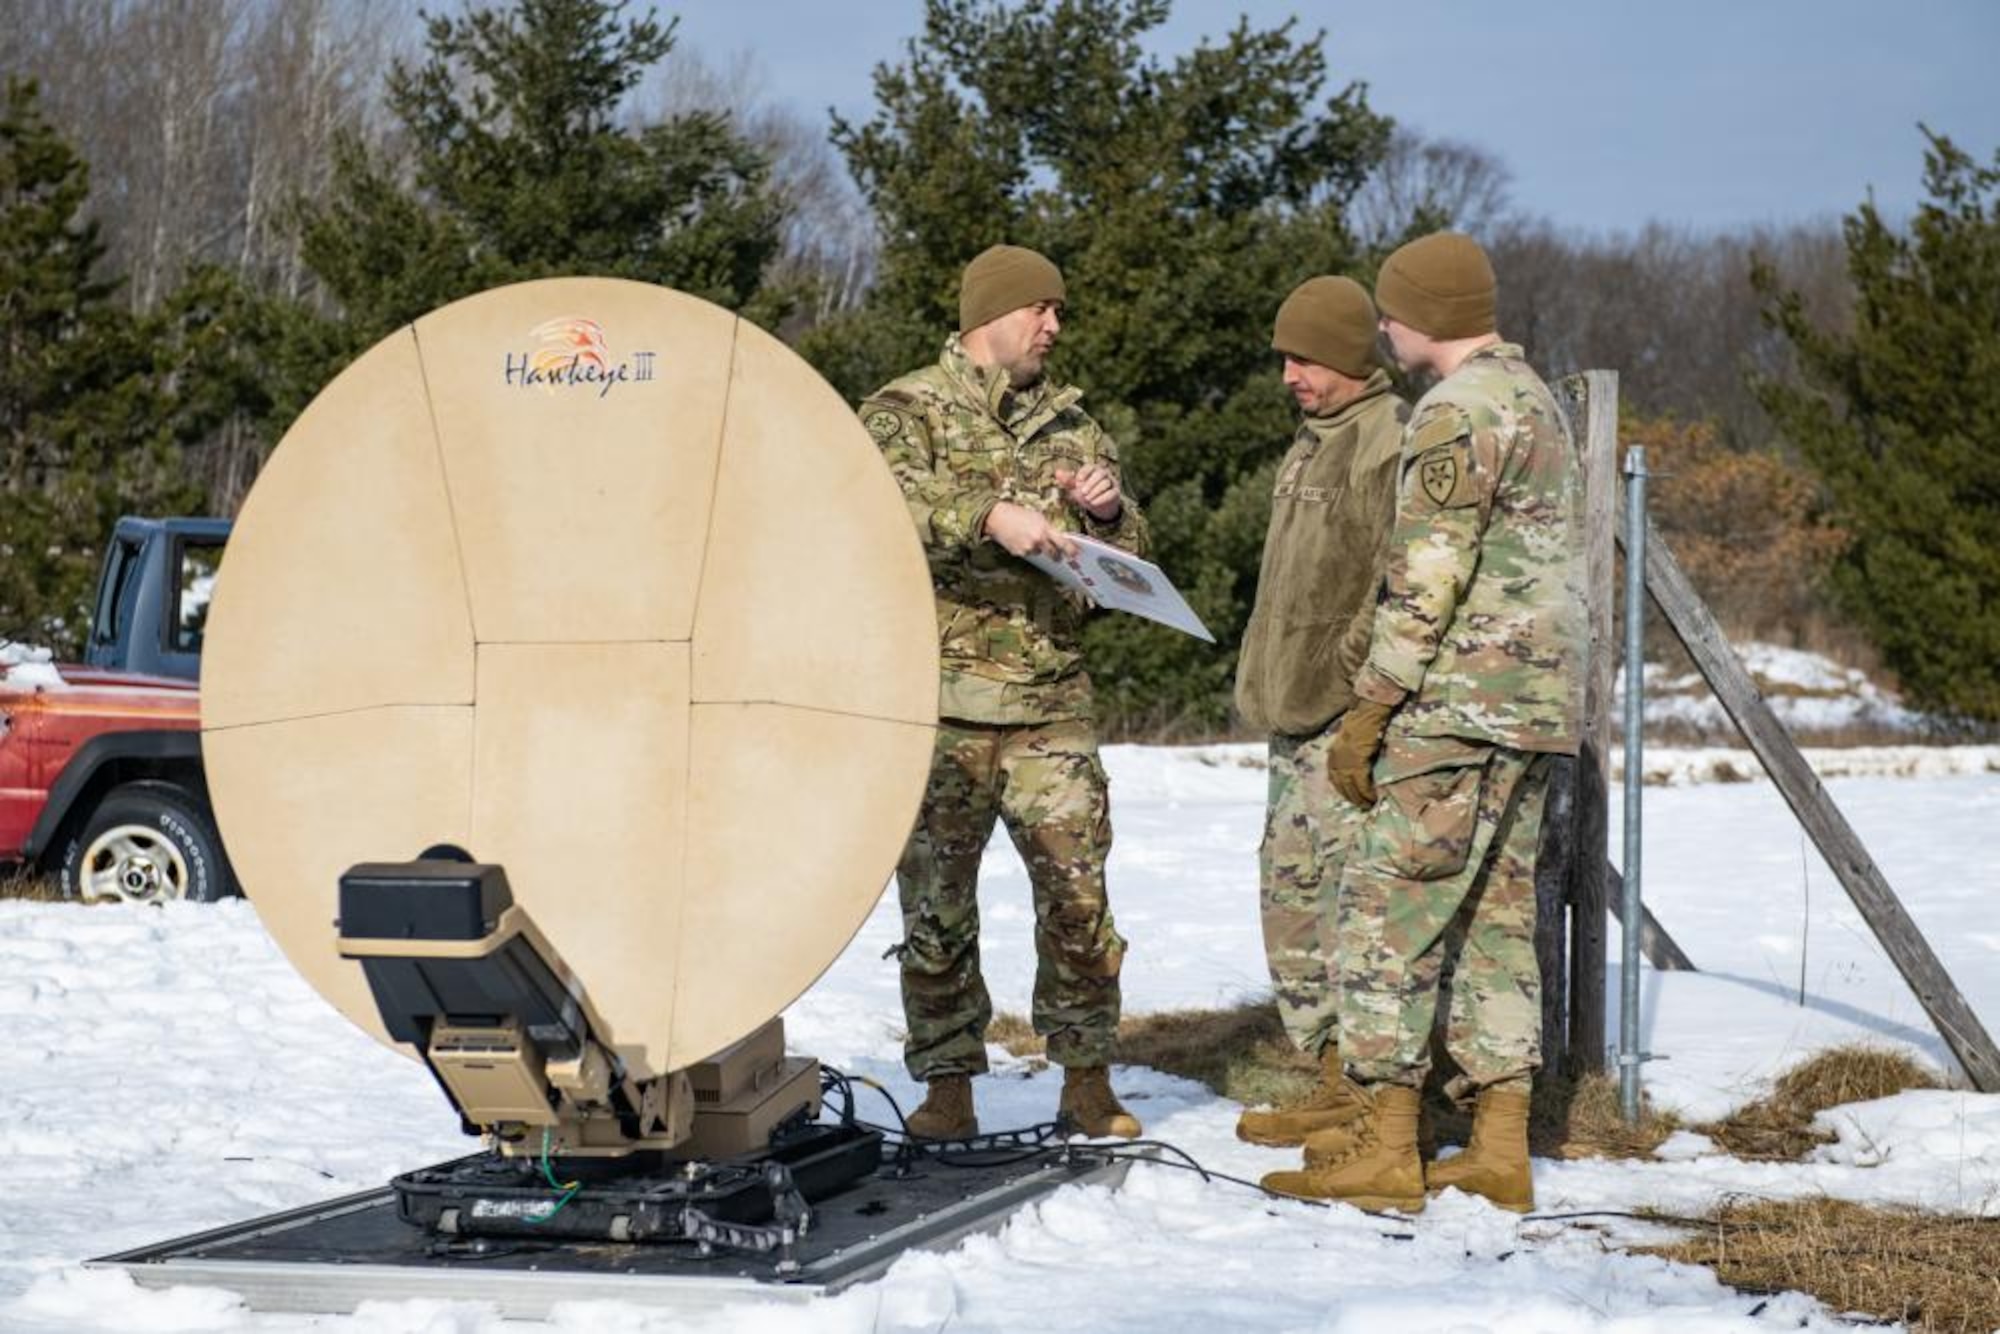 U.S. Air Force Airmen from the 290th Joint Communications Support Squadron set up communication equipment during an exercise, Feb. 13, 2023 at Alpena Combat Readiness Training Center, Michigan. The exercise tested their ability to establish communications in an extreme cold weather environment. (U.S. Air National Guard photo by Senior Airman Jesse Hanson)